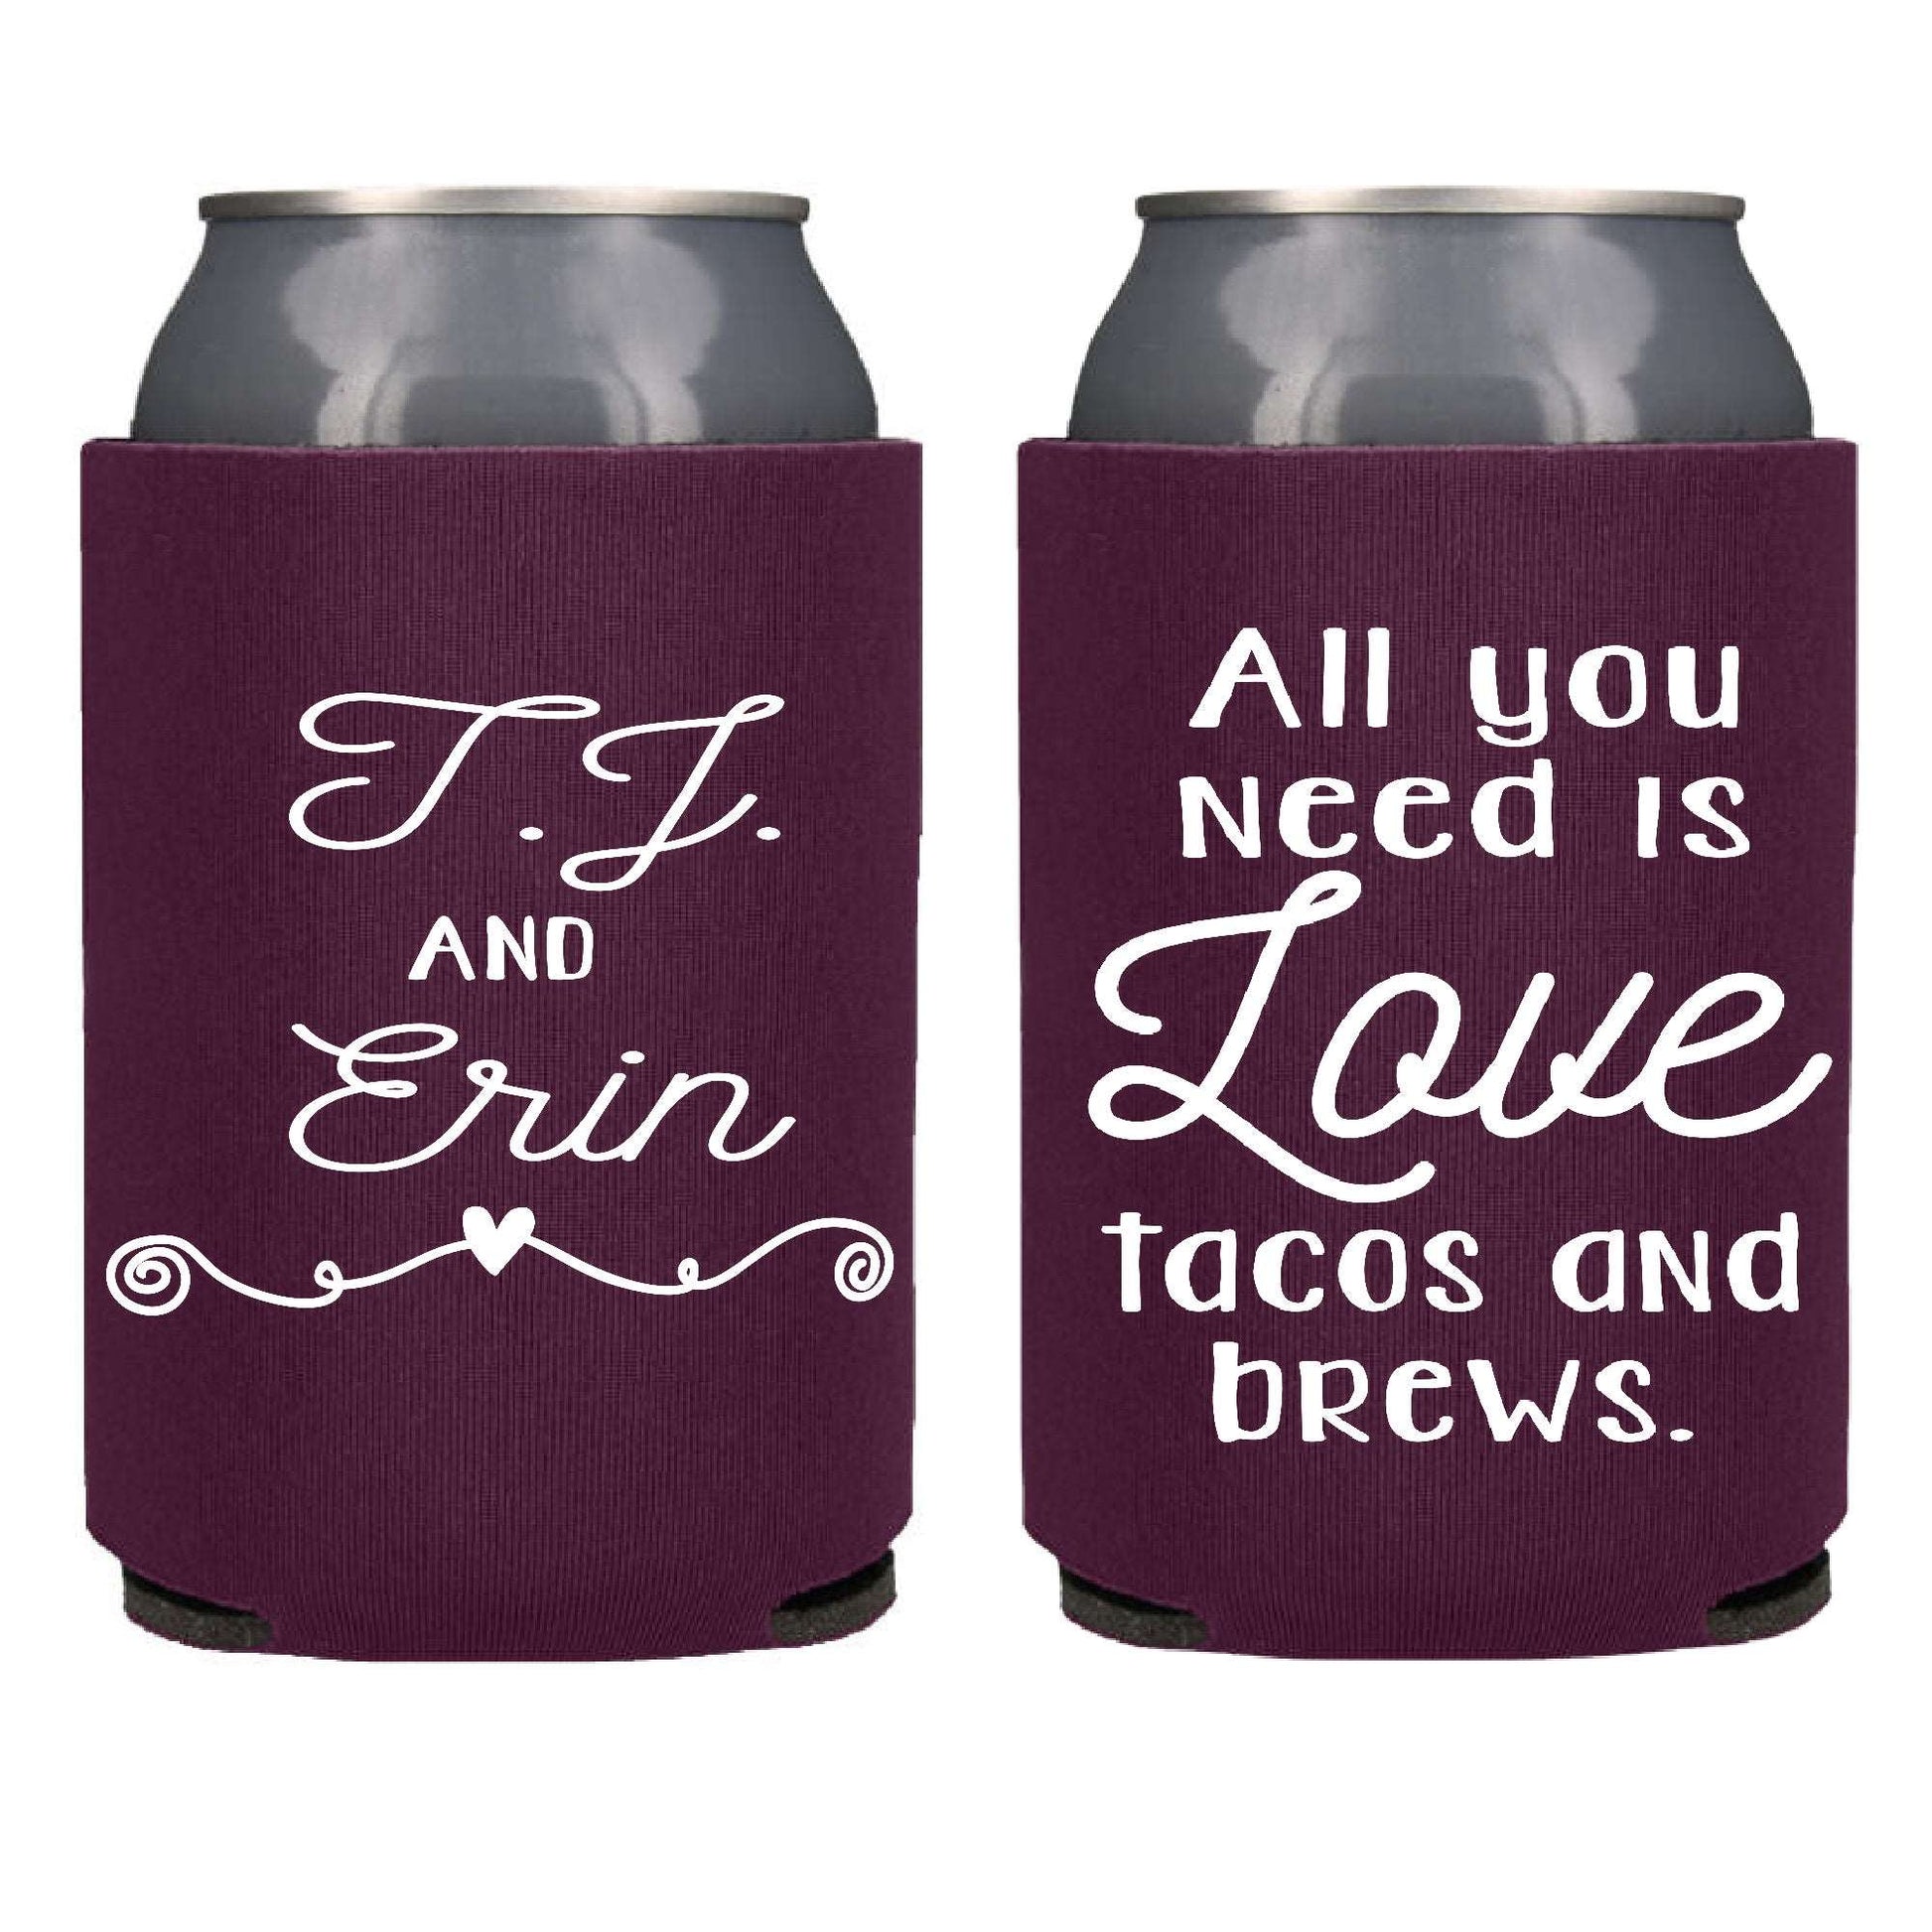 All you need is love, tacos and brews Screen Printed Can Coolers freeshipping - Be Vocal Designs